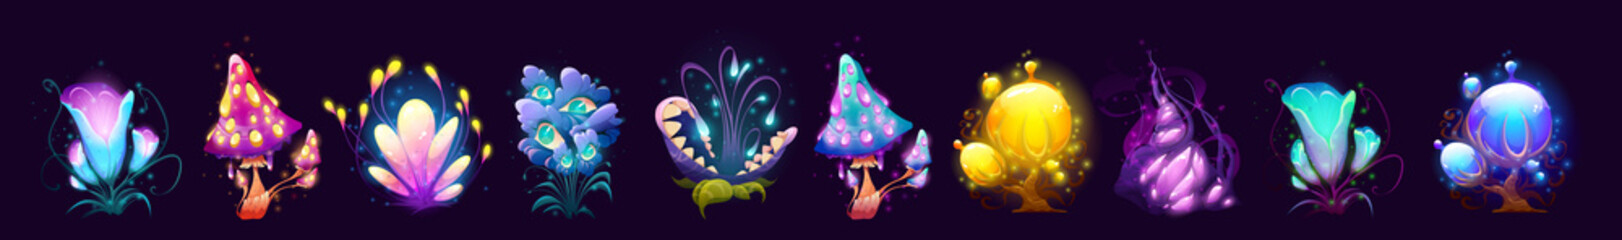 Fototapeta Fantasy mushrooms, flowers and trees, alien planet or magic game plants isolated set. Unusual nature flora or fauna assets, strange fairy tale or extraterrestrial elements, Cartoon vector illustration obraz